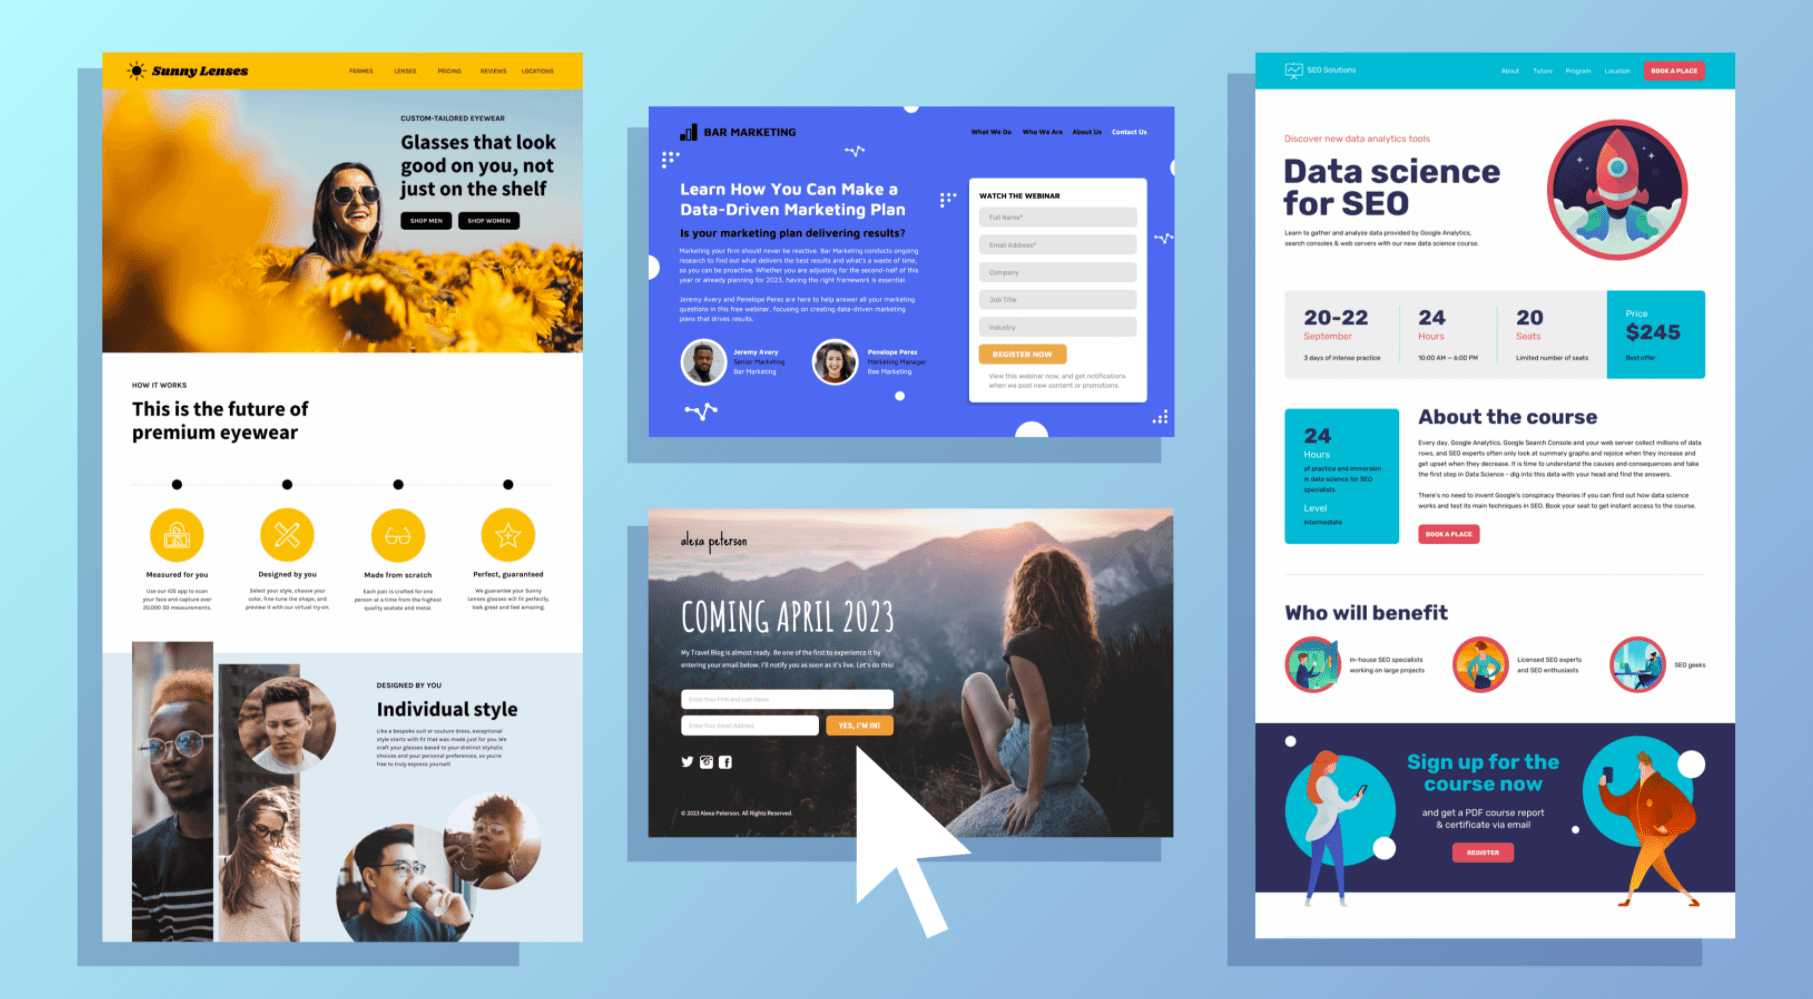 Landing Page Examples